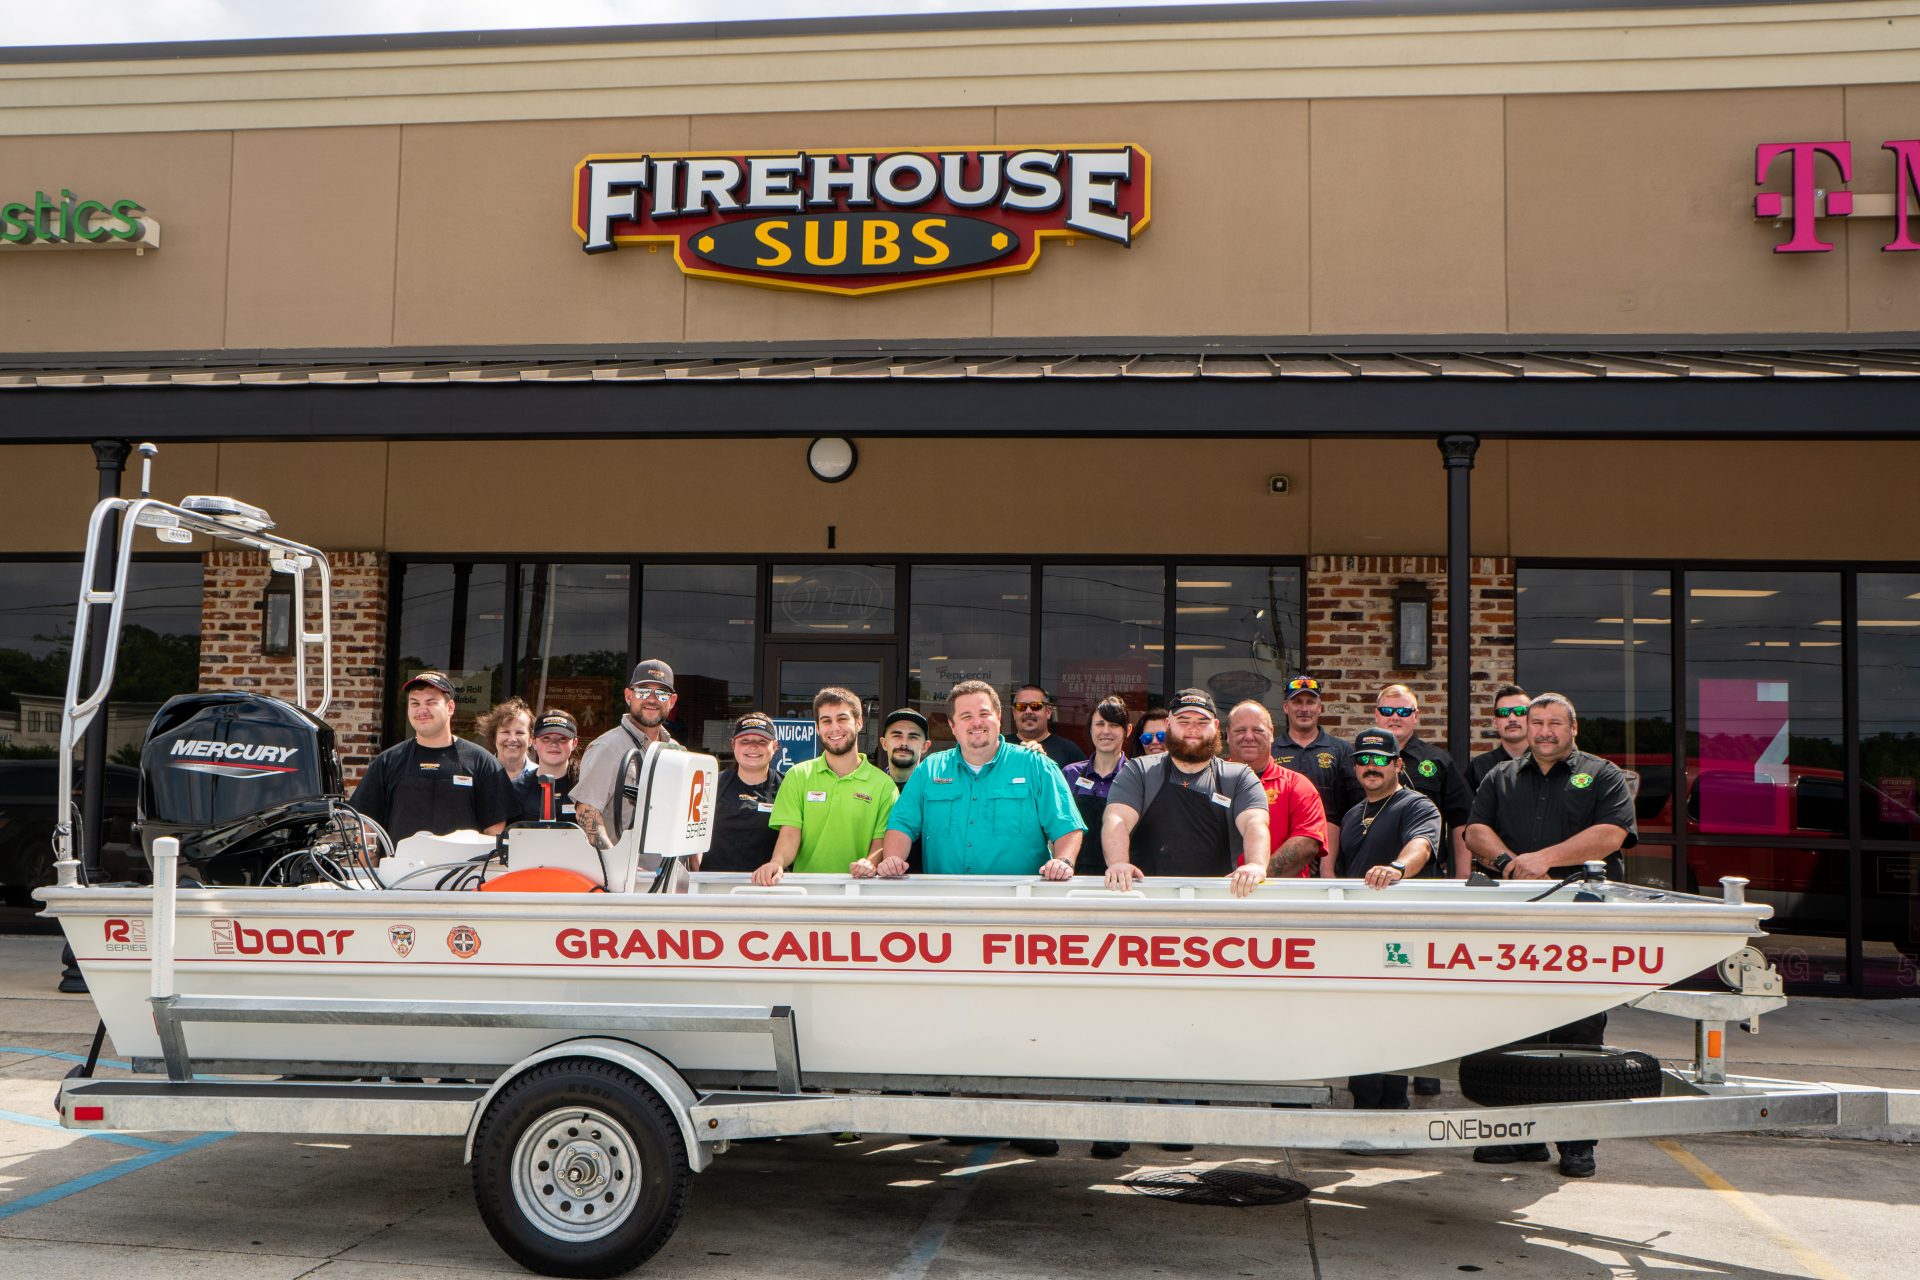 Sub public. Firehouse subs. Firehouse - category 5. Public Safety.